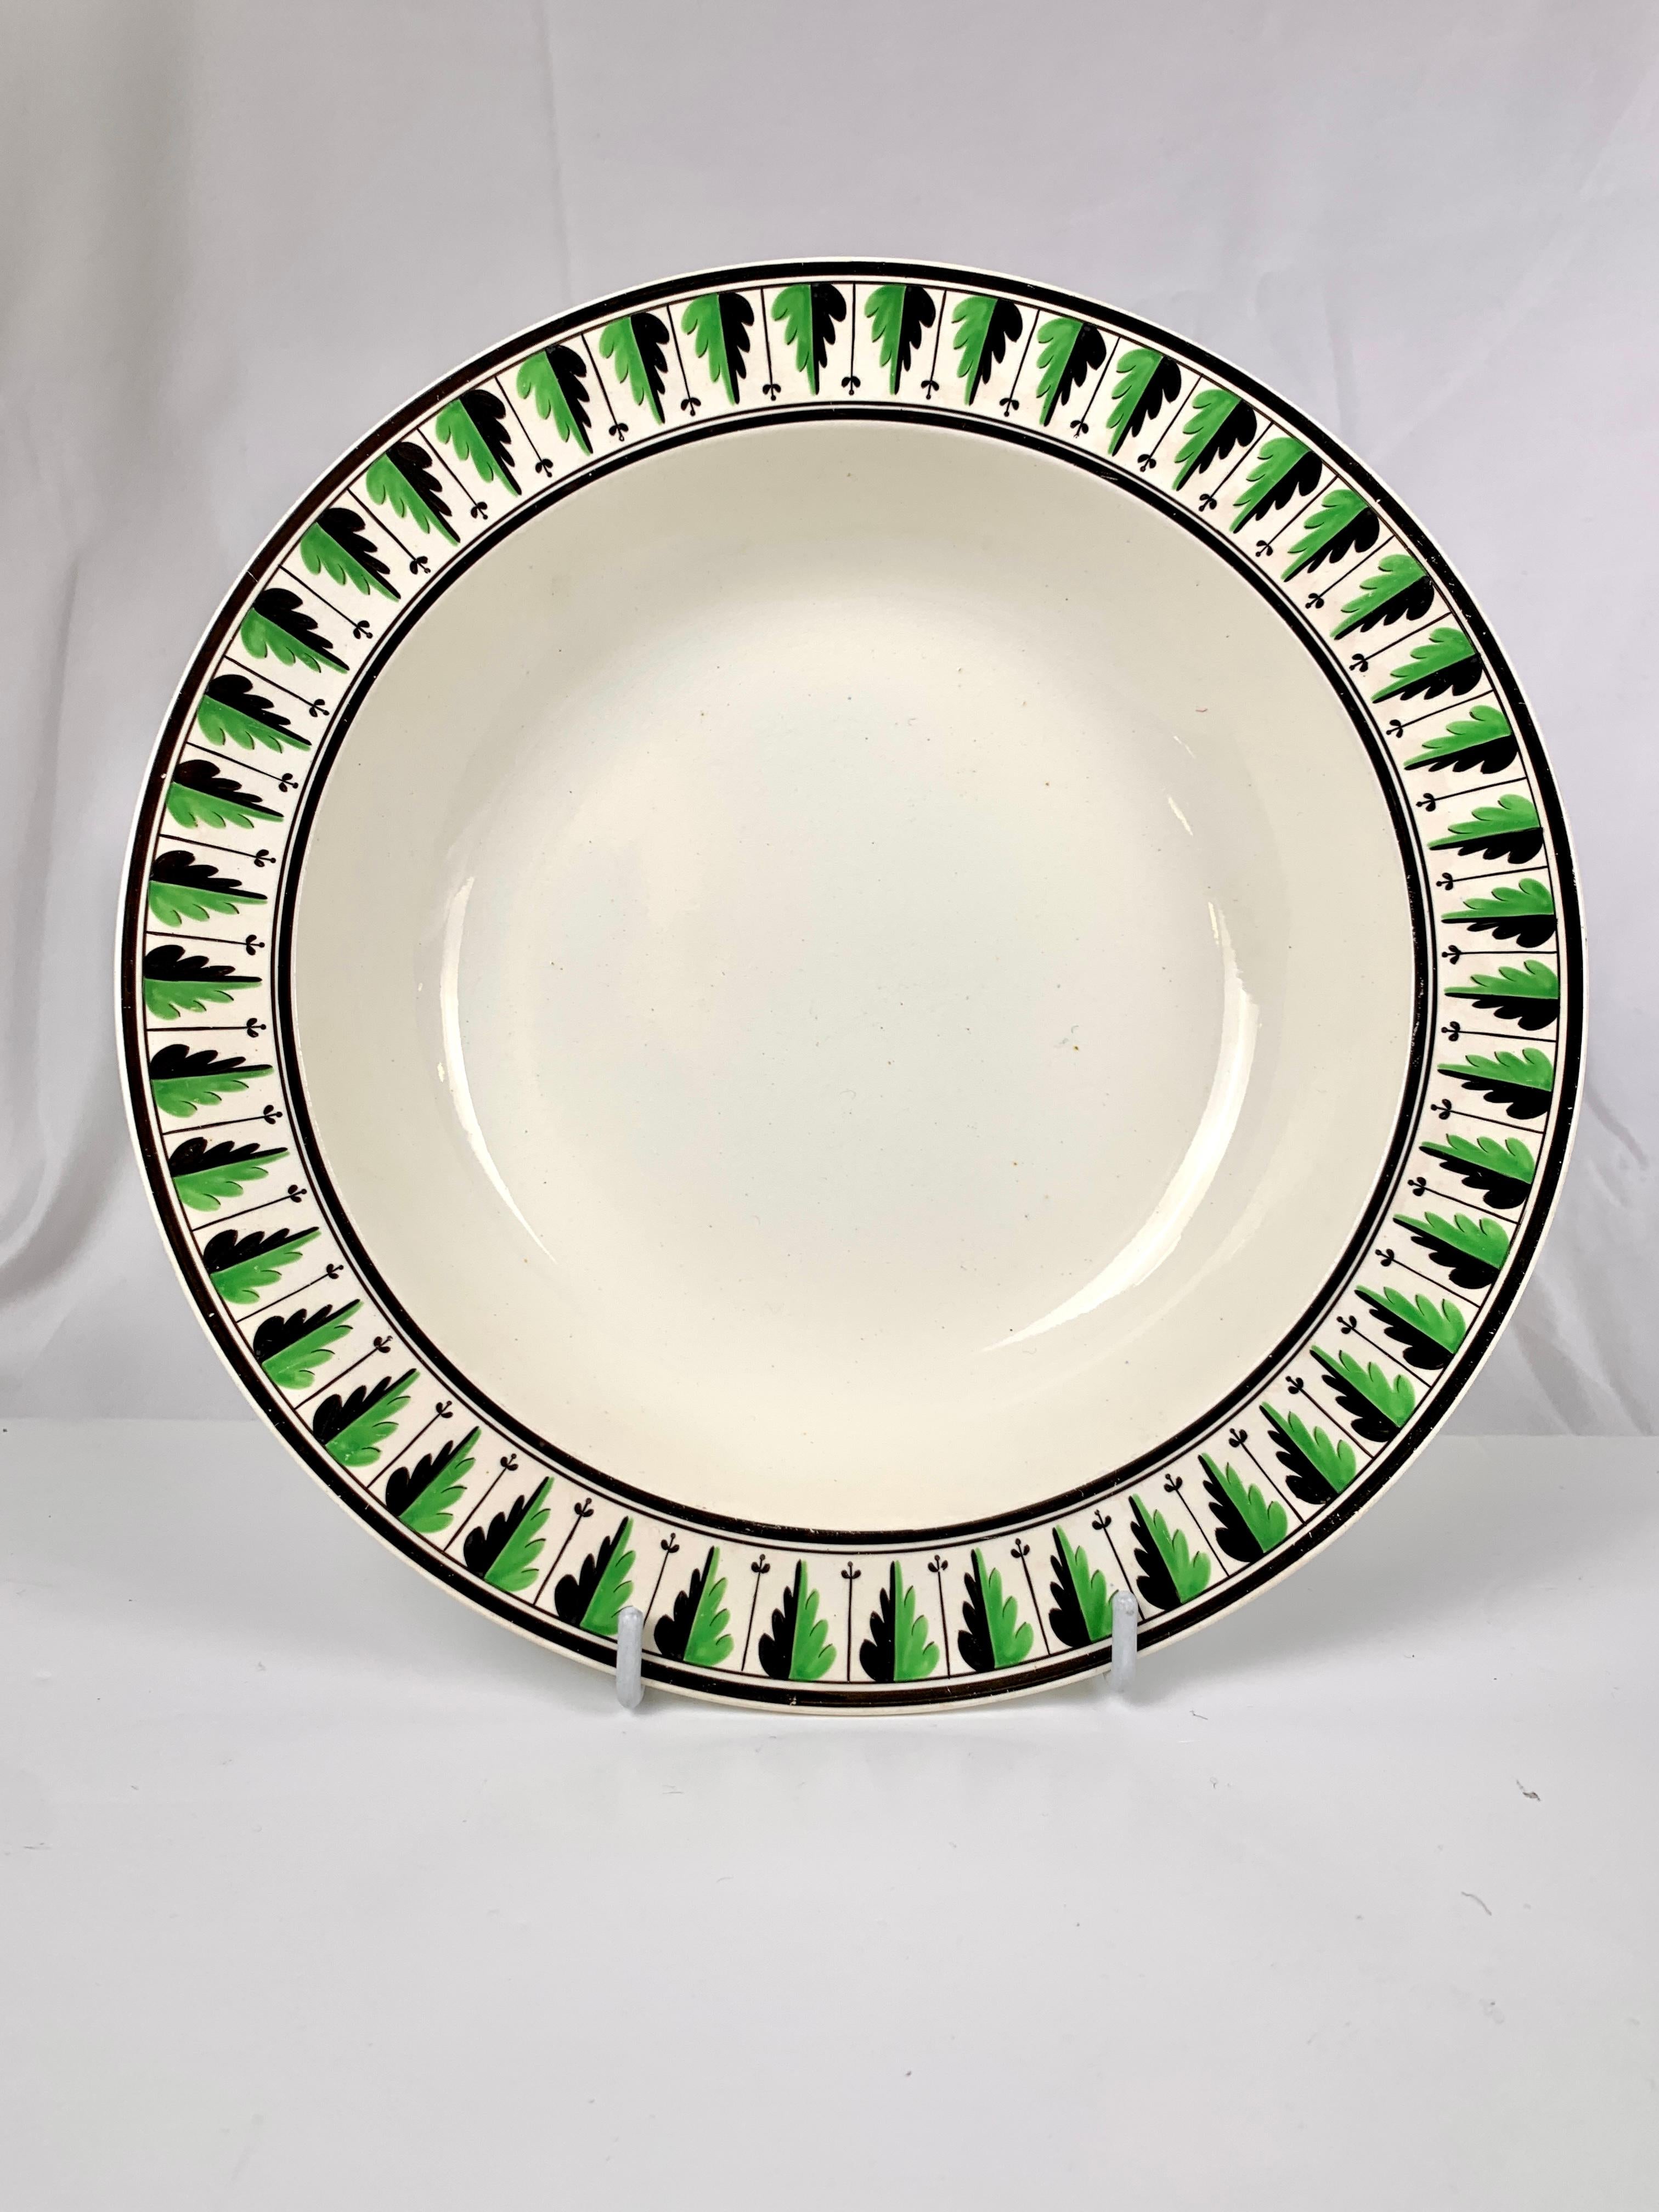 This elegant set of eleven large creamware soup dishes from Spode, circa 1820, is a beautiful example of English neoclassical style. 
The acanthus leaf border, painted with bright enamels with each leaf divided down the middle, painted half green